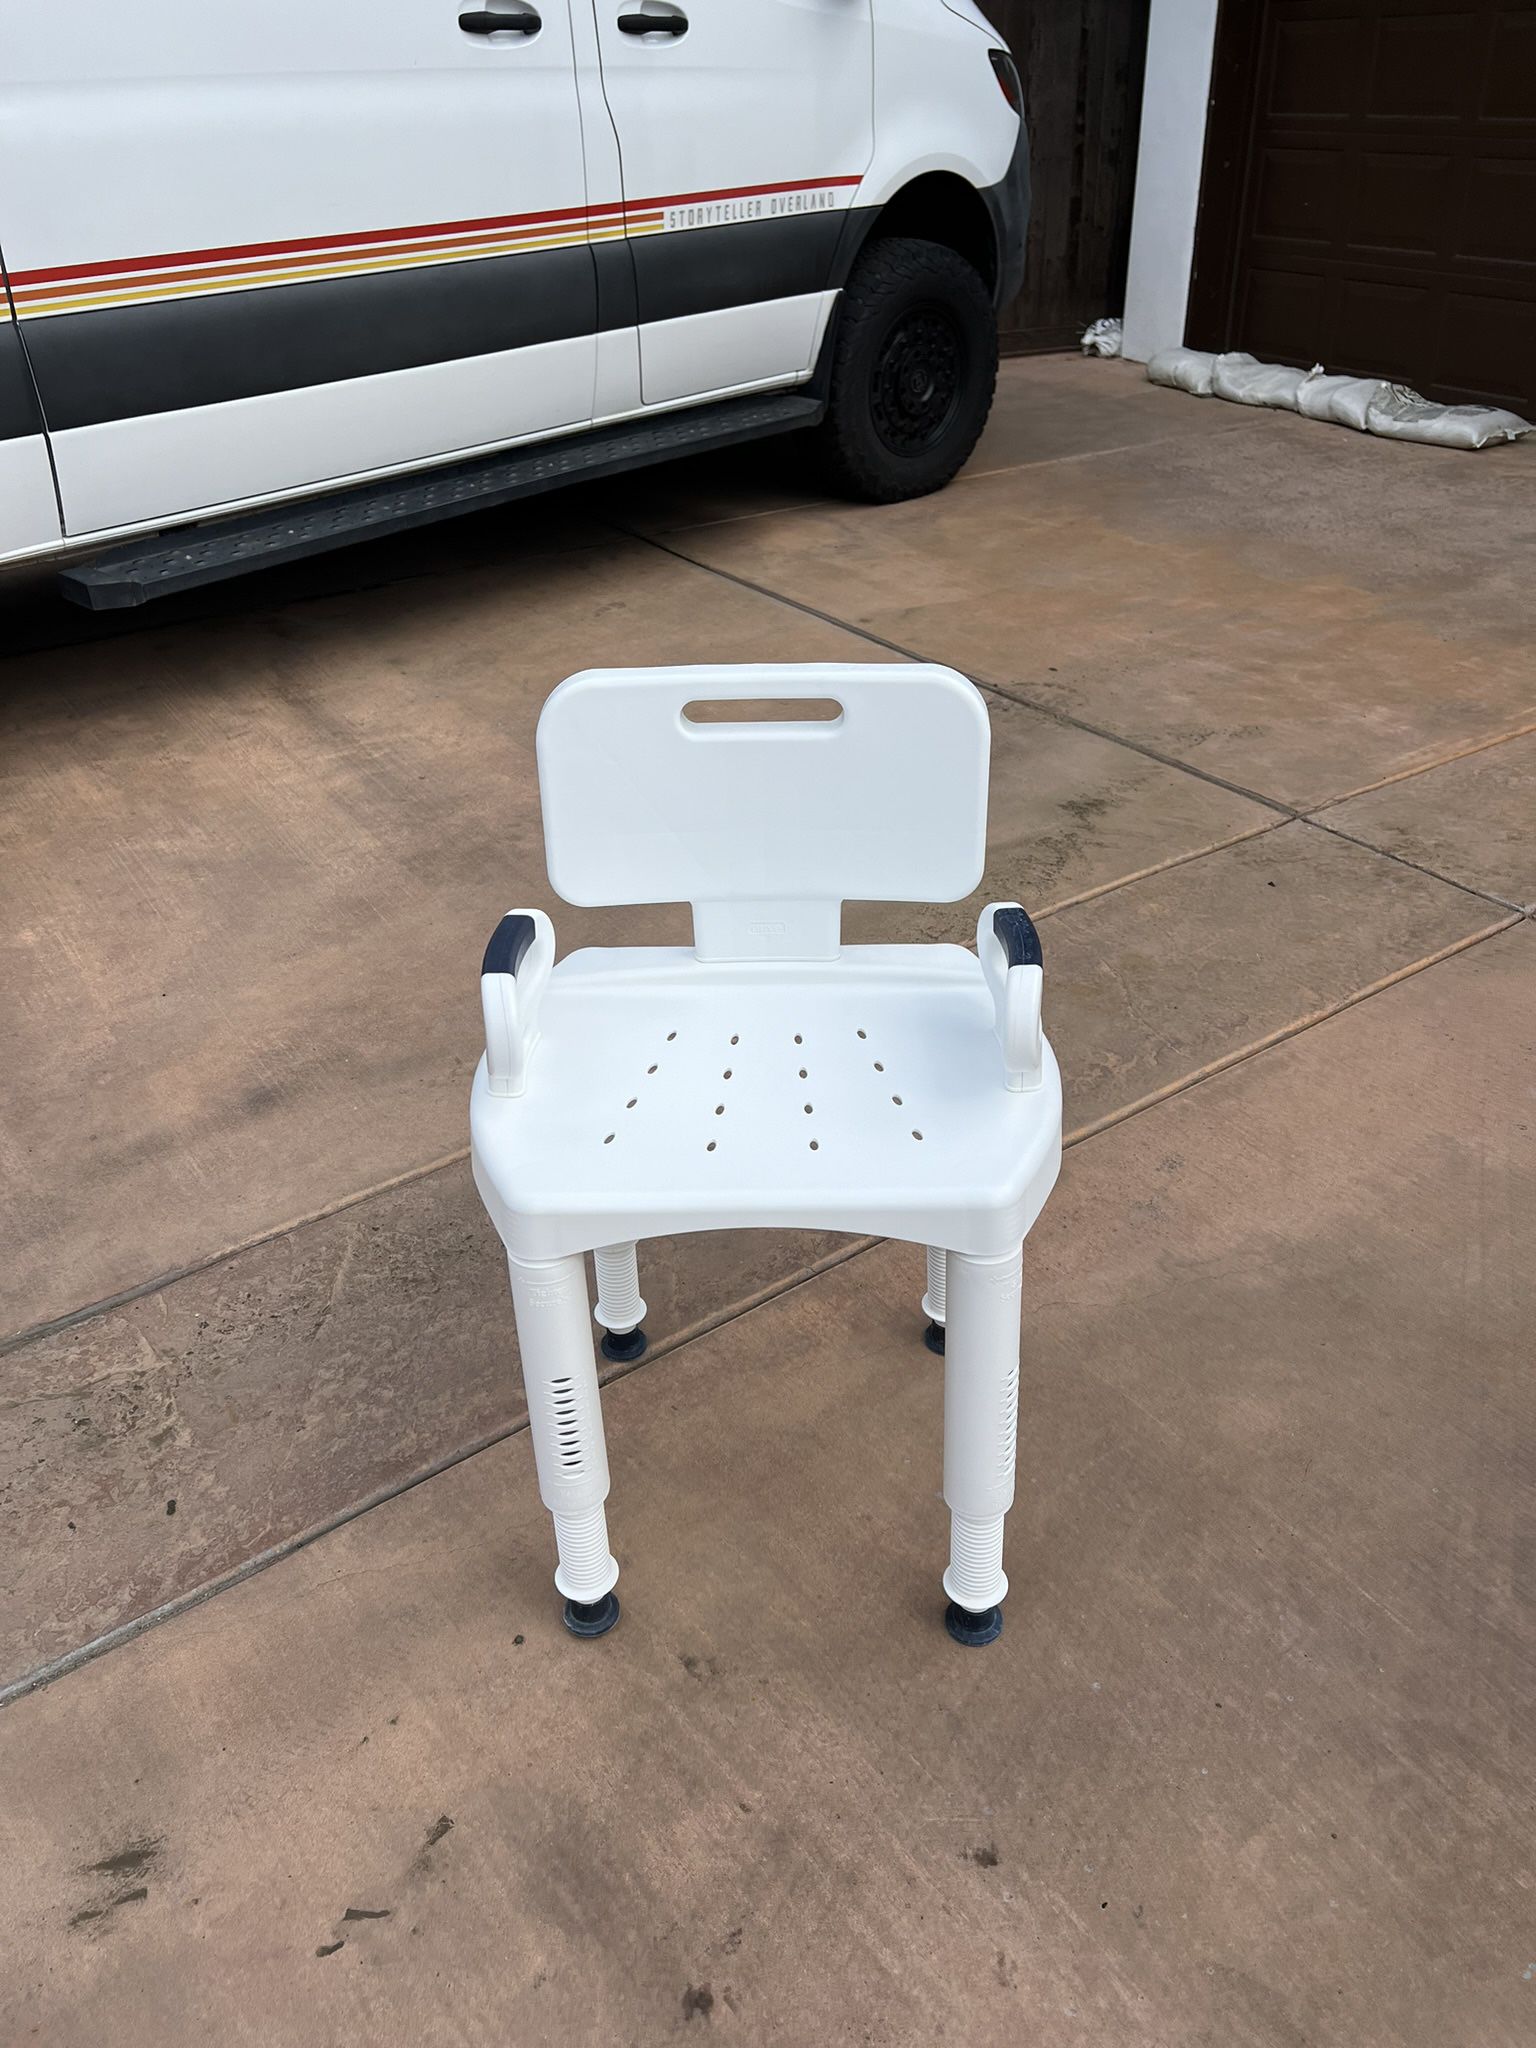 Drive Medical RTL12505 Handicap Bathroom Bench with Back and Arms, White